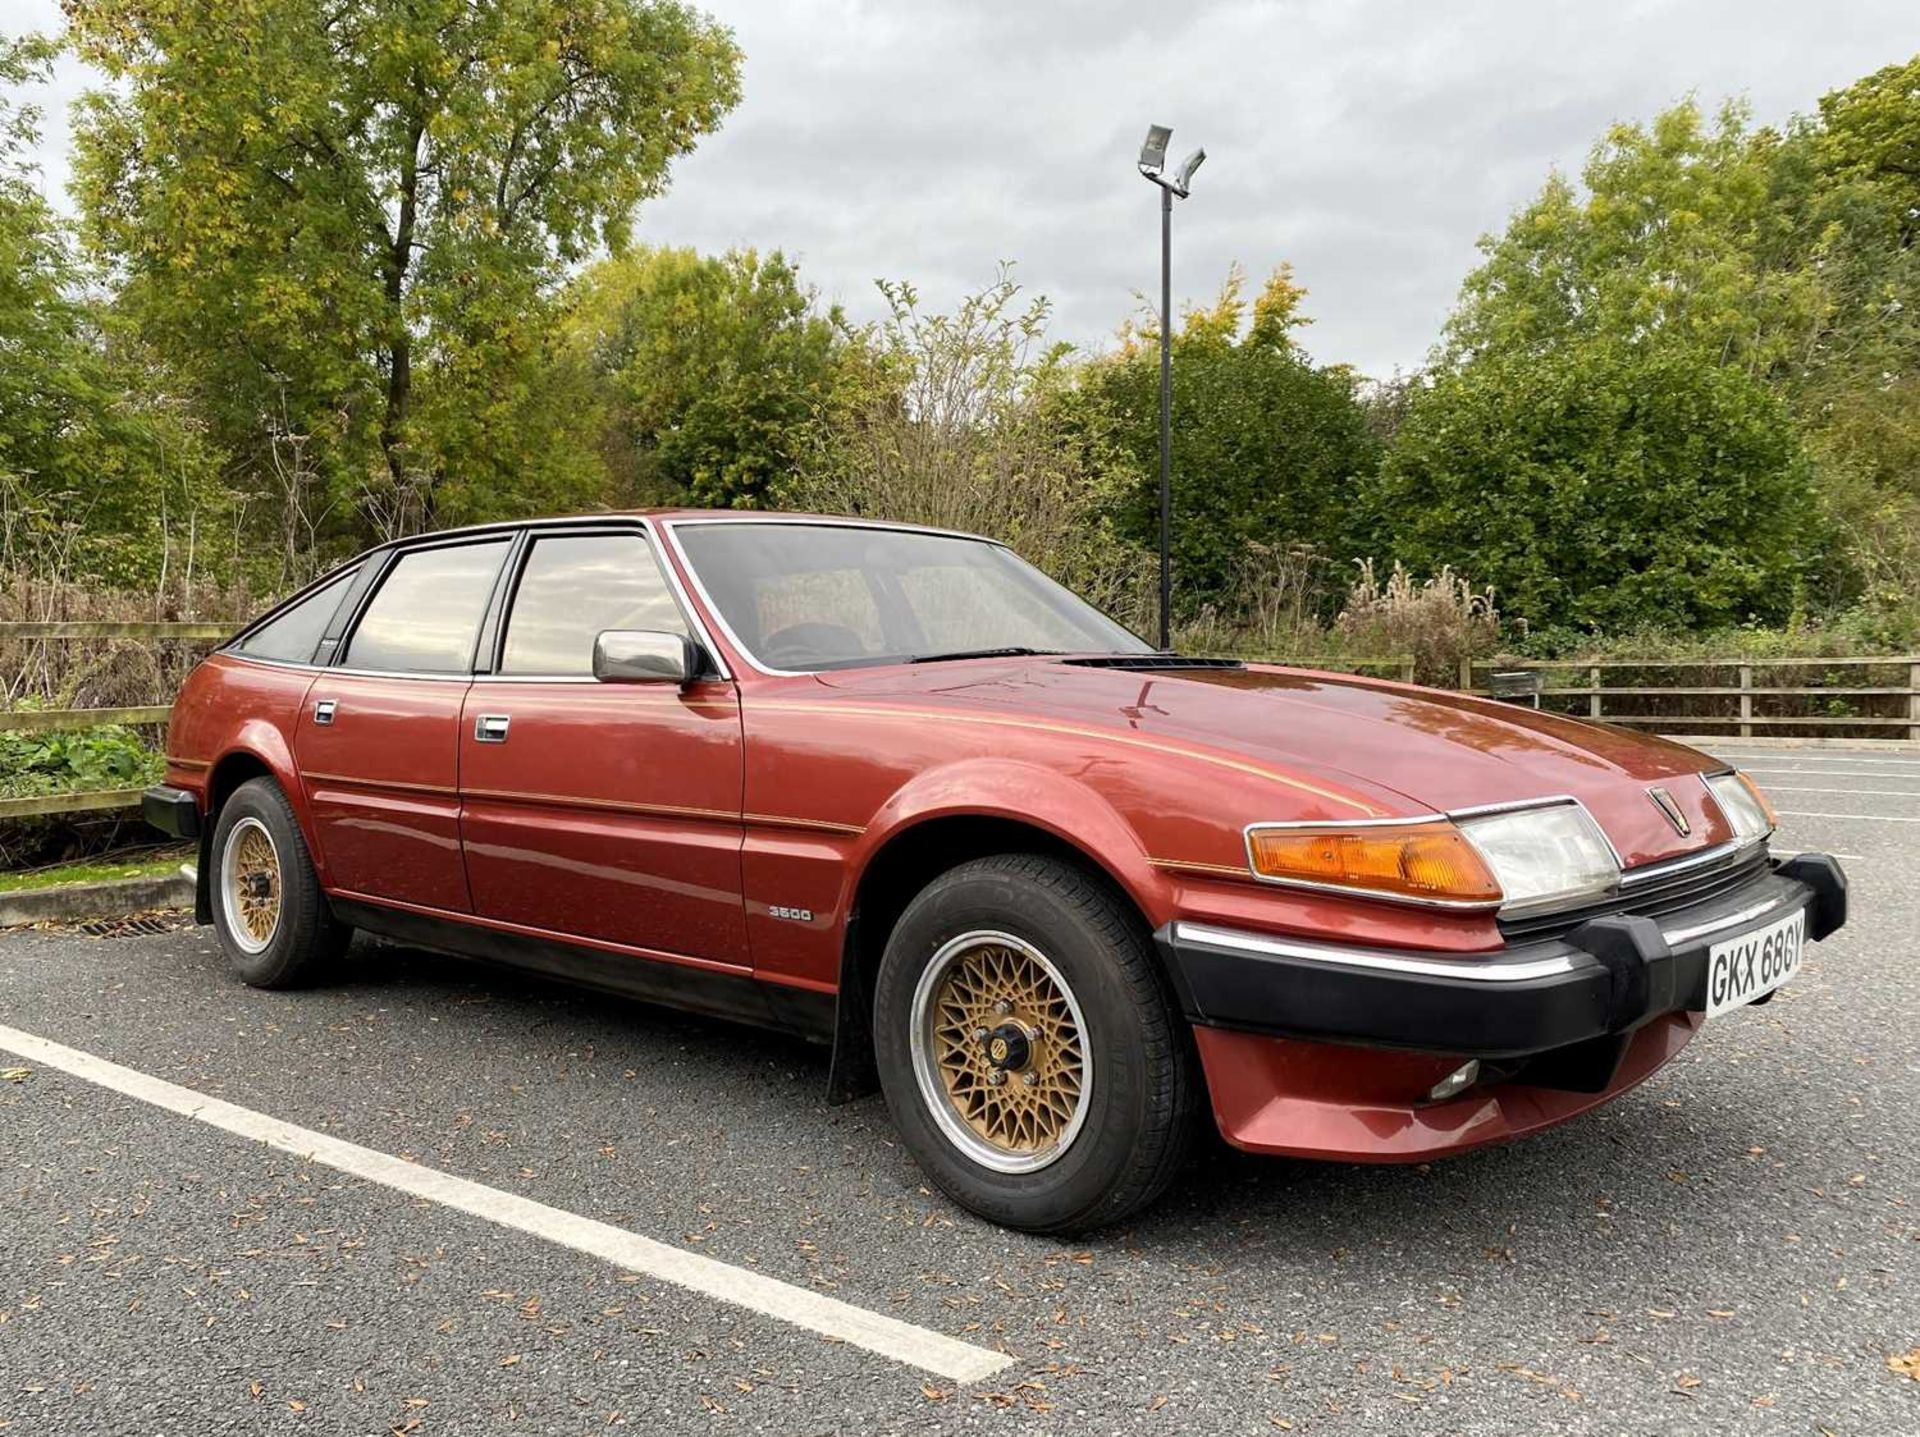 1982 Rover SD1 3500 SE Only 29,000 miles - Image 9 of 100